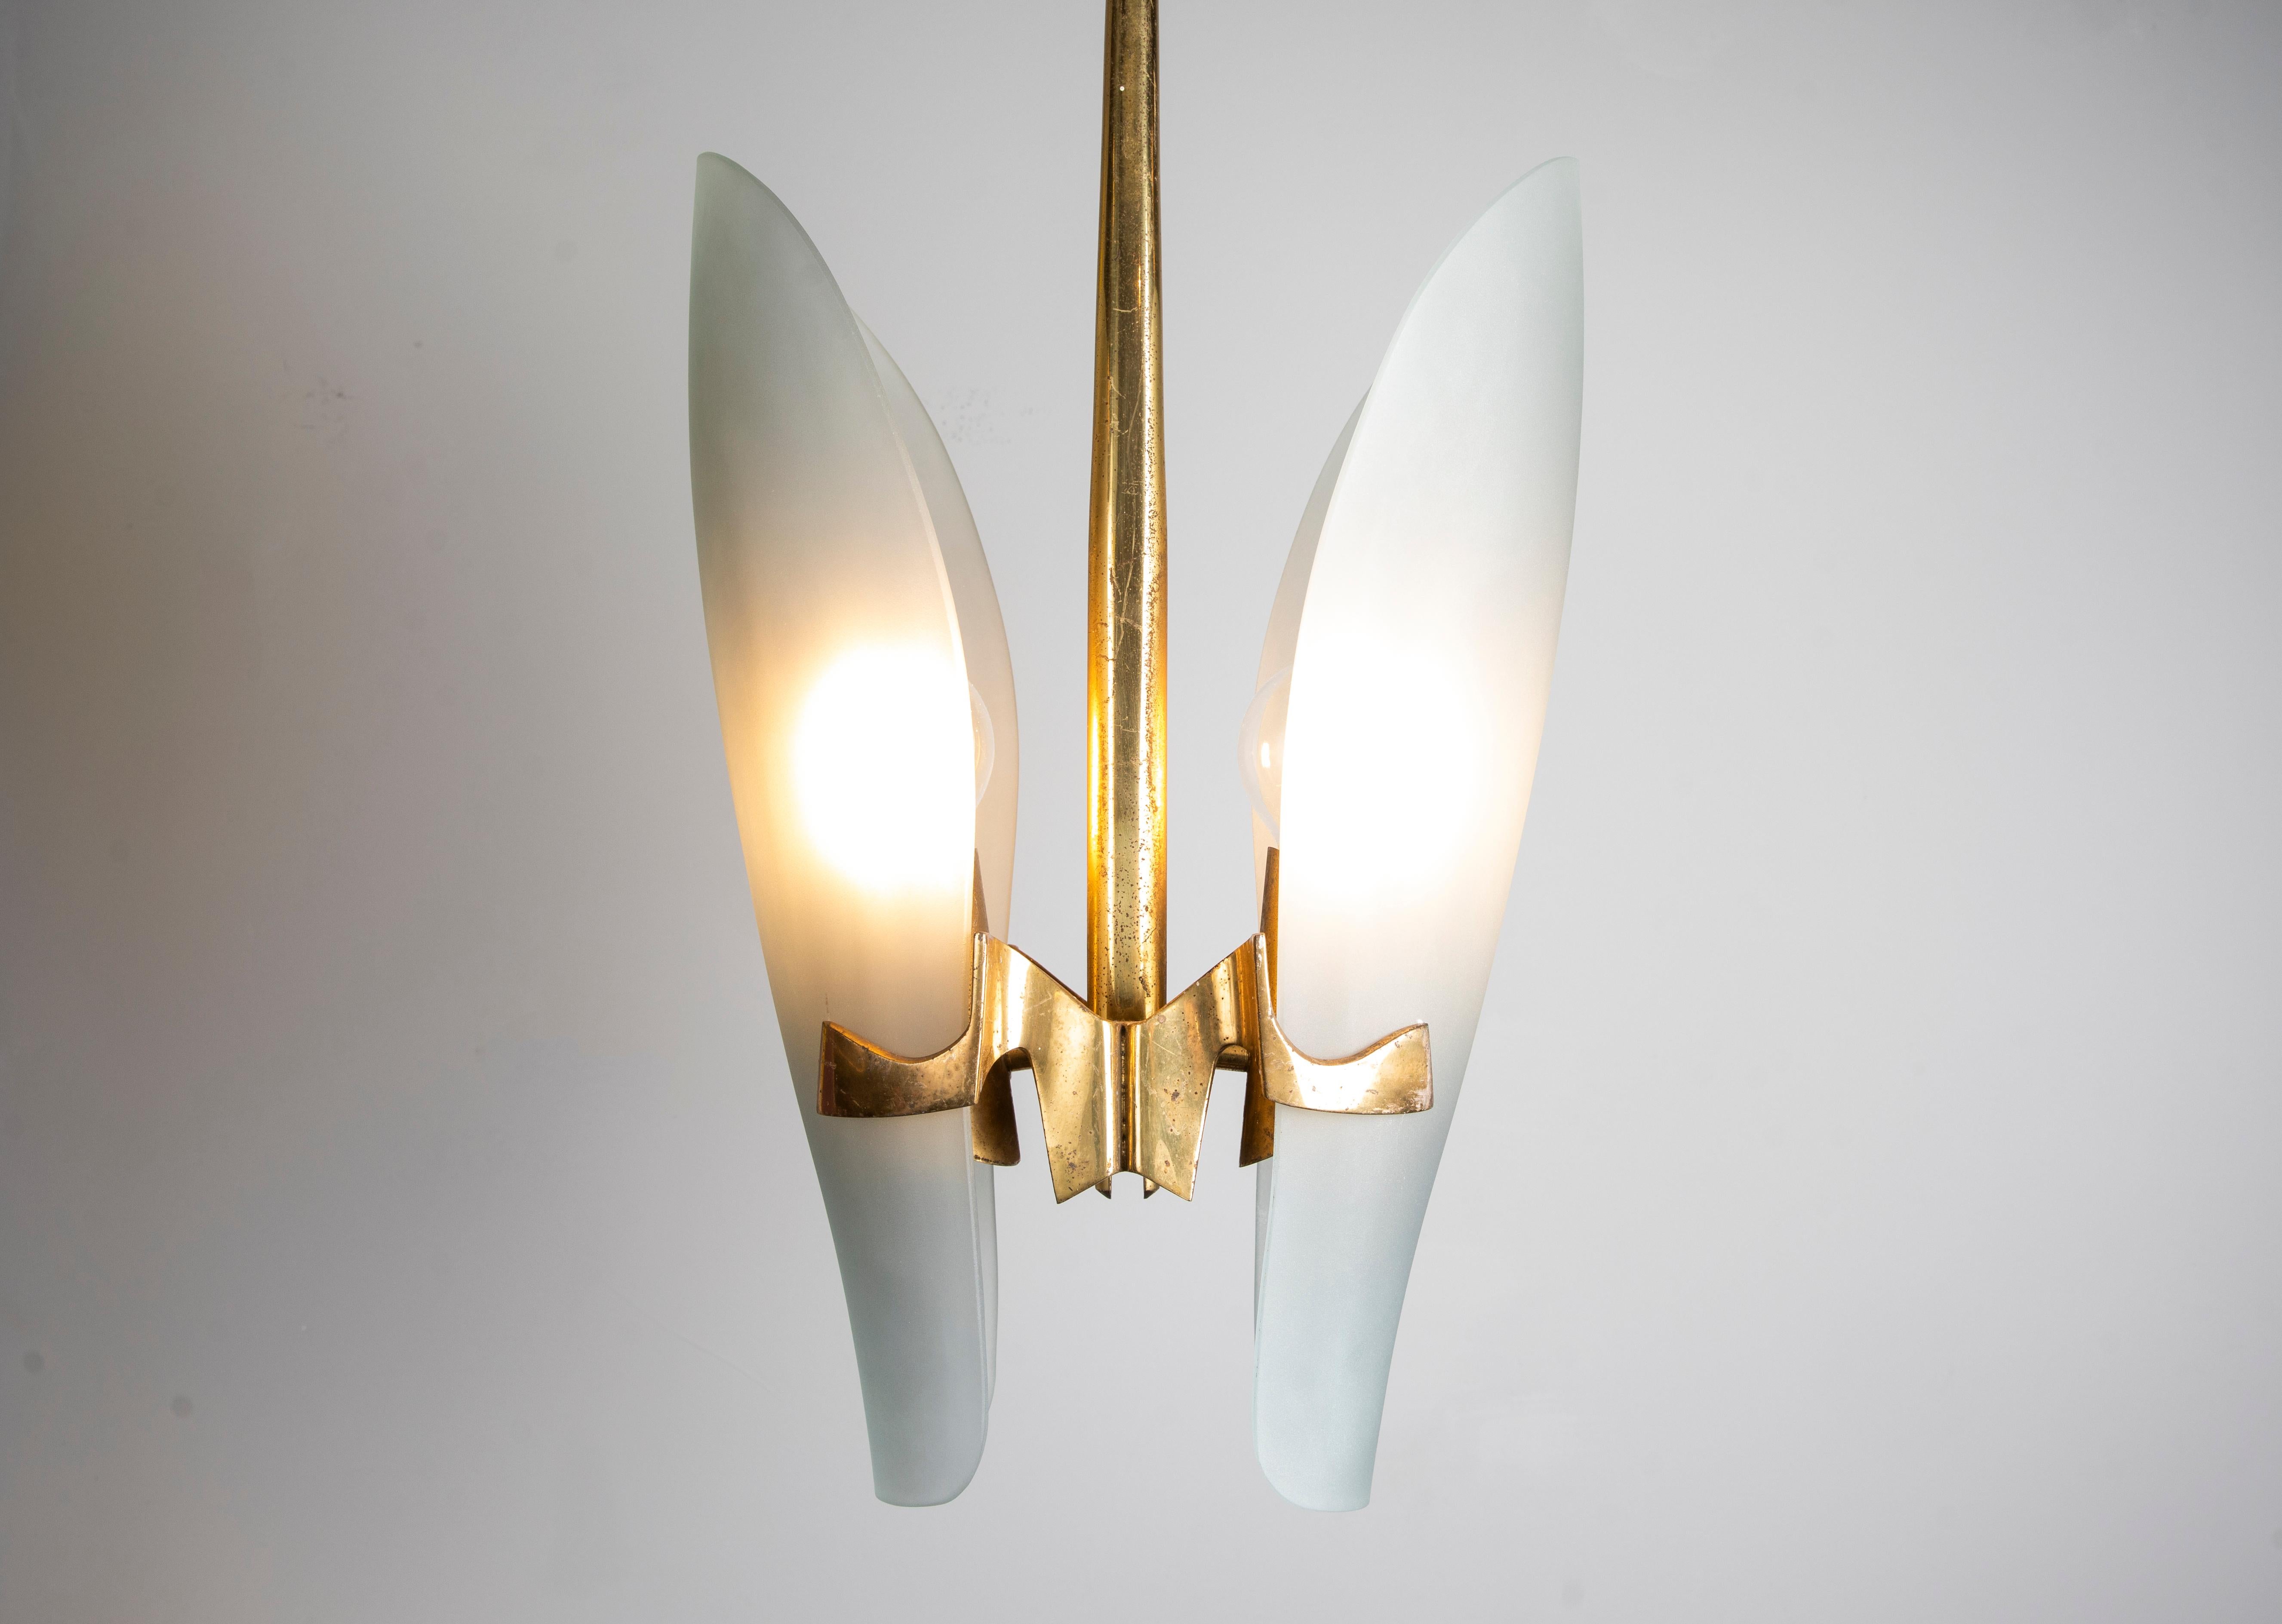 Beautiful and very rare Max Ingrand ceiling lamp mod 1636 Fontana Arte production 1960 circa
Max Ingrand, whose full name was Maurice Max Ingrand (Bressuire 1908 - Paris 1969) was a French glassmaker decorator and designer.